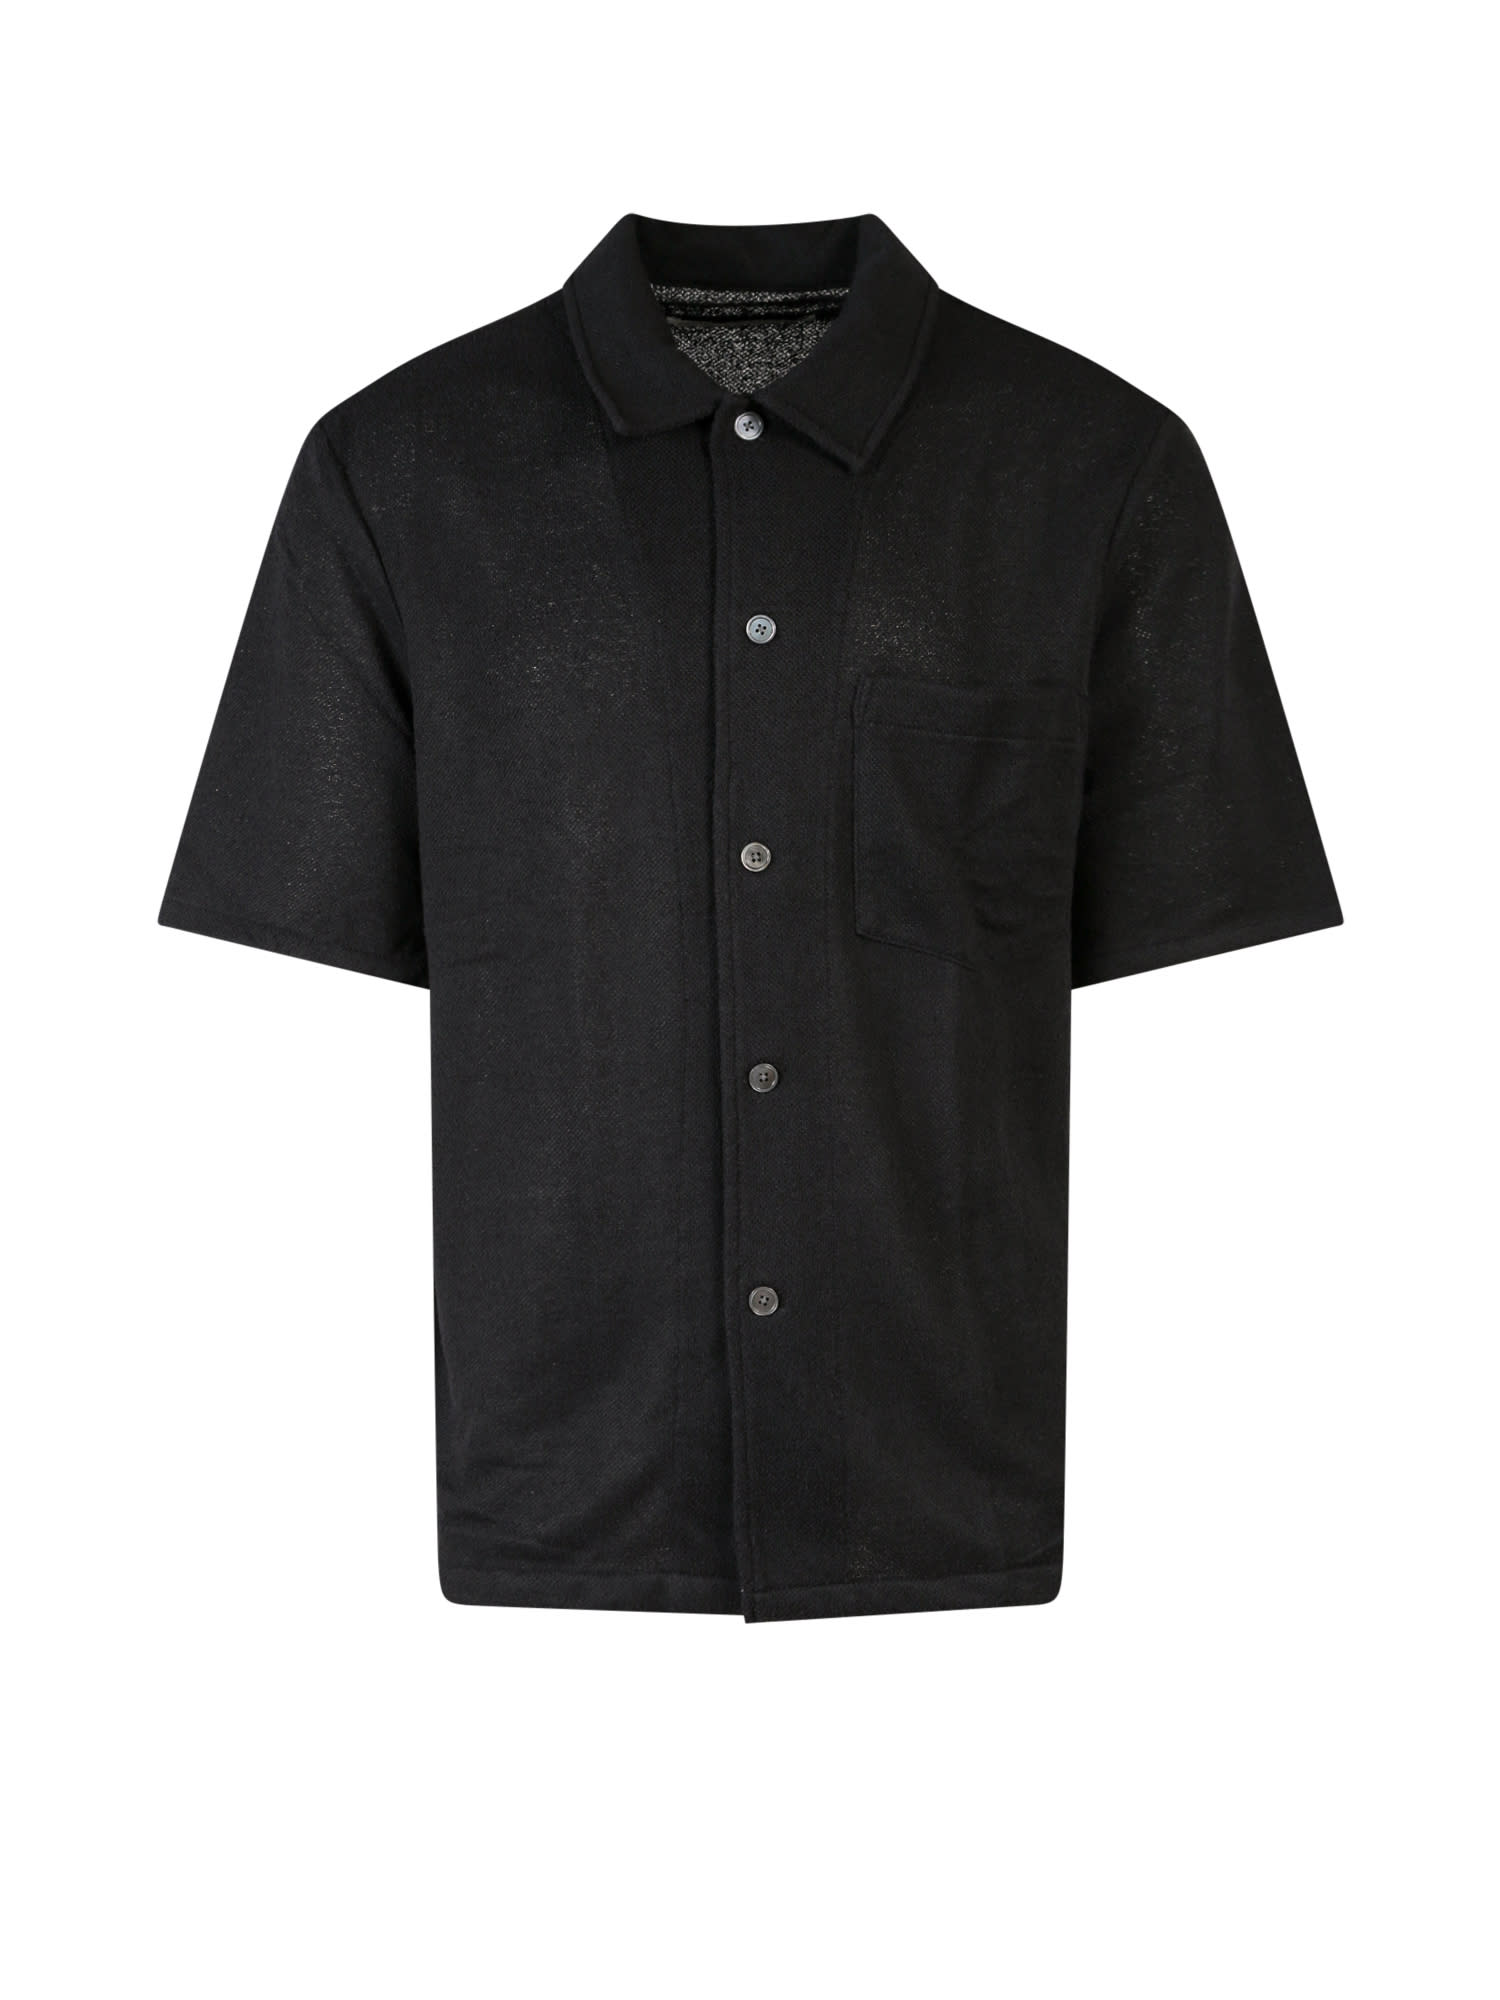 Shop Our Legacy Shirt In Black